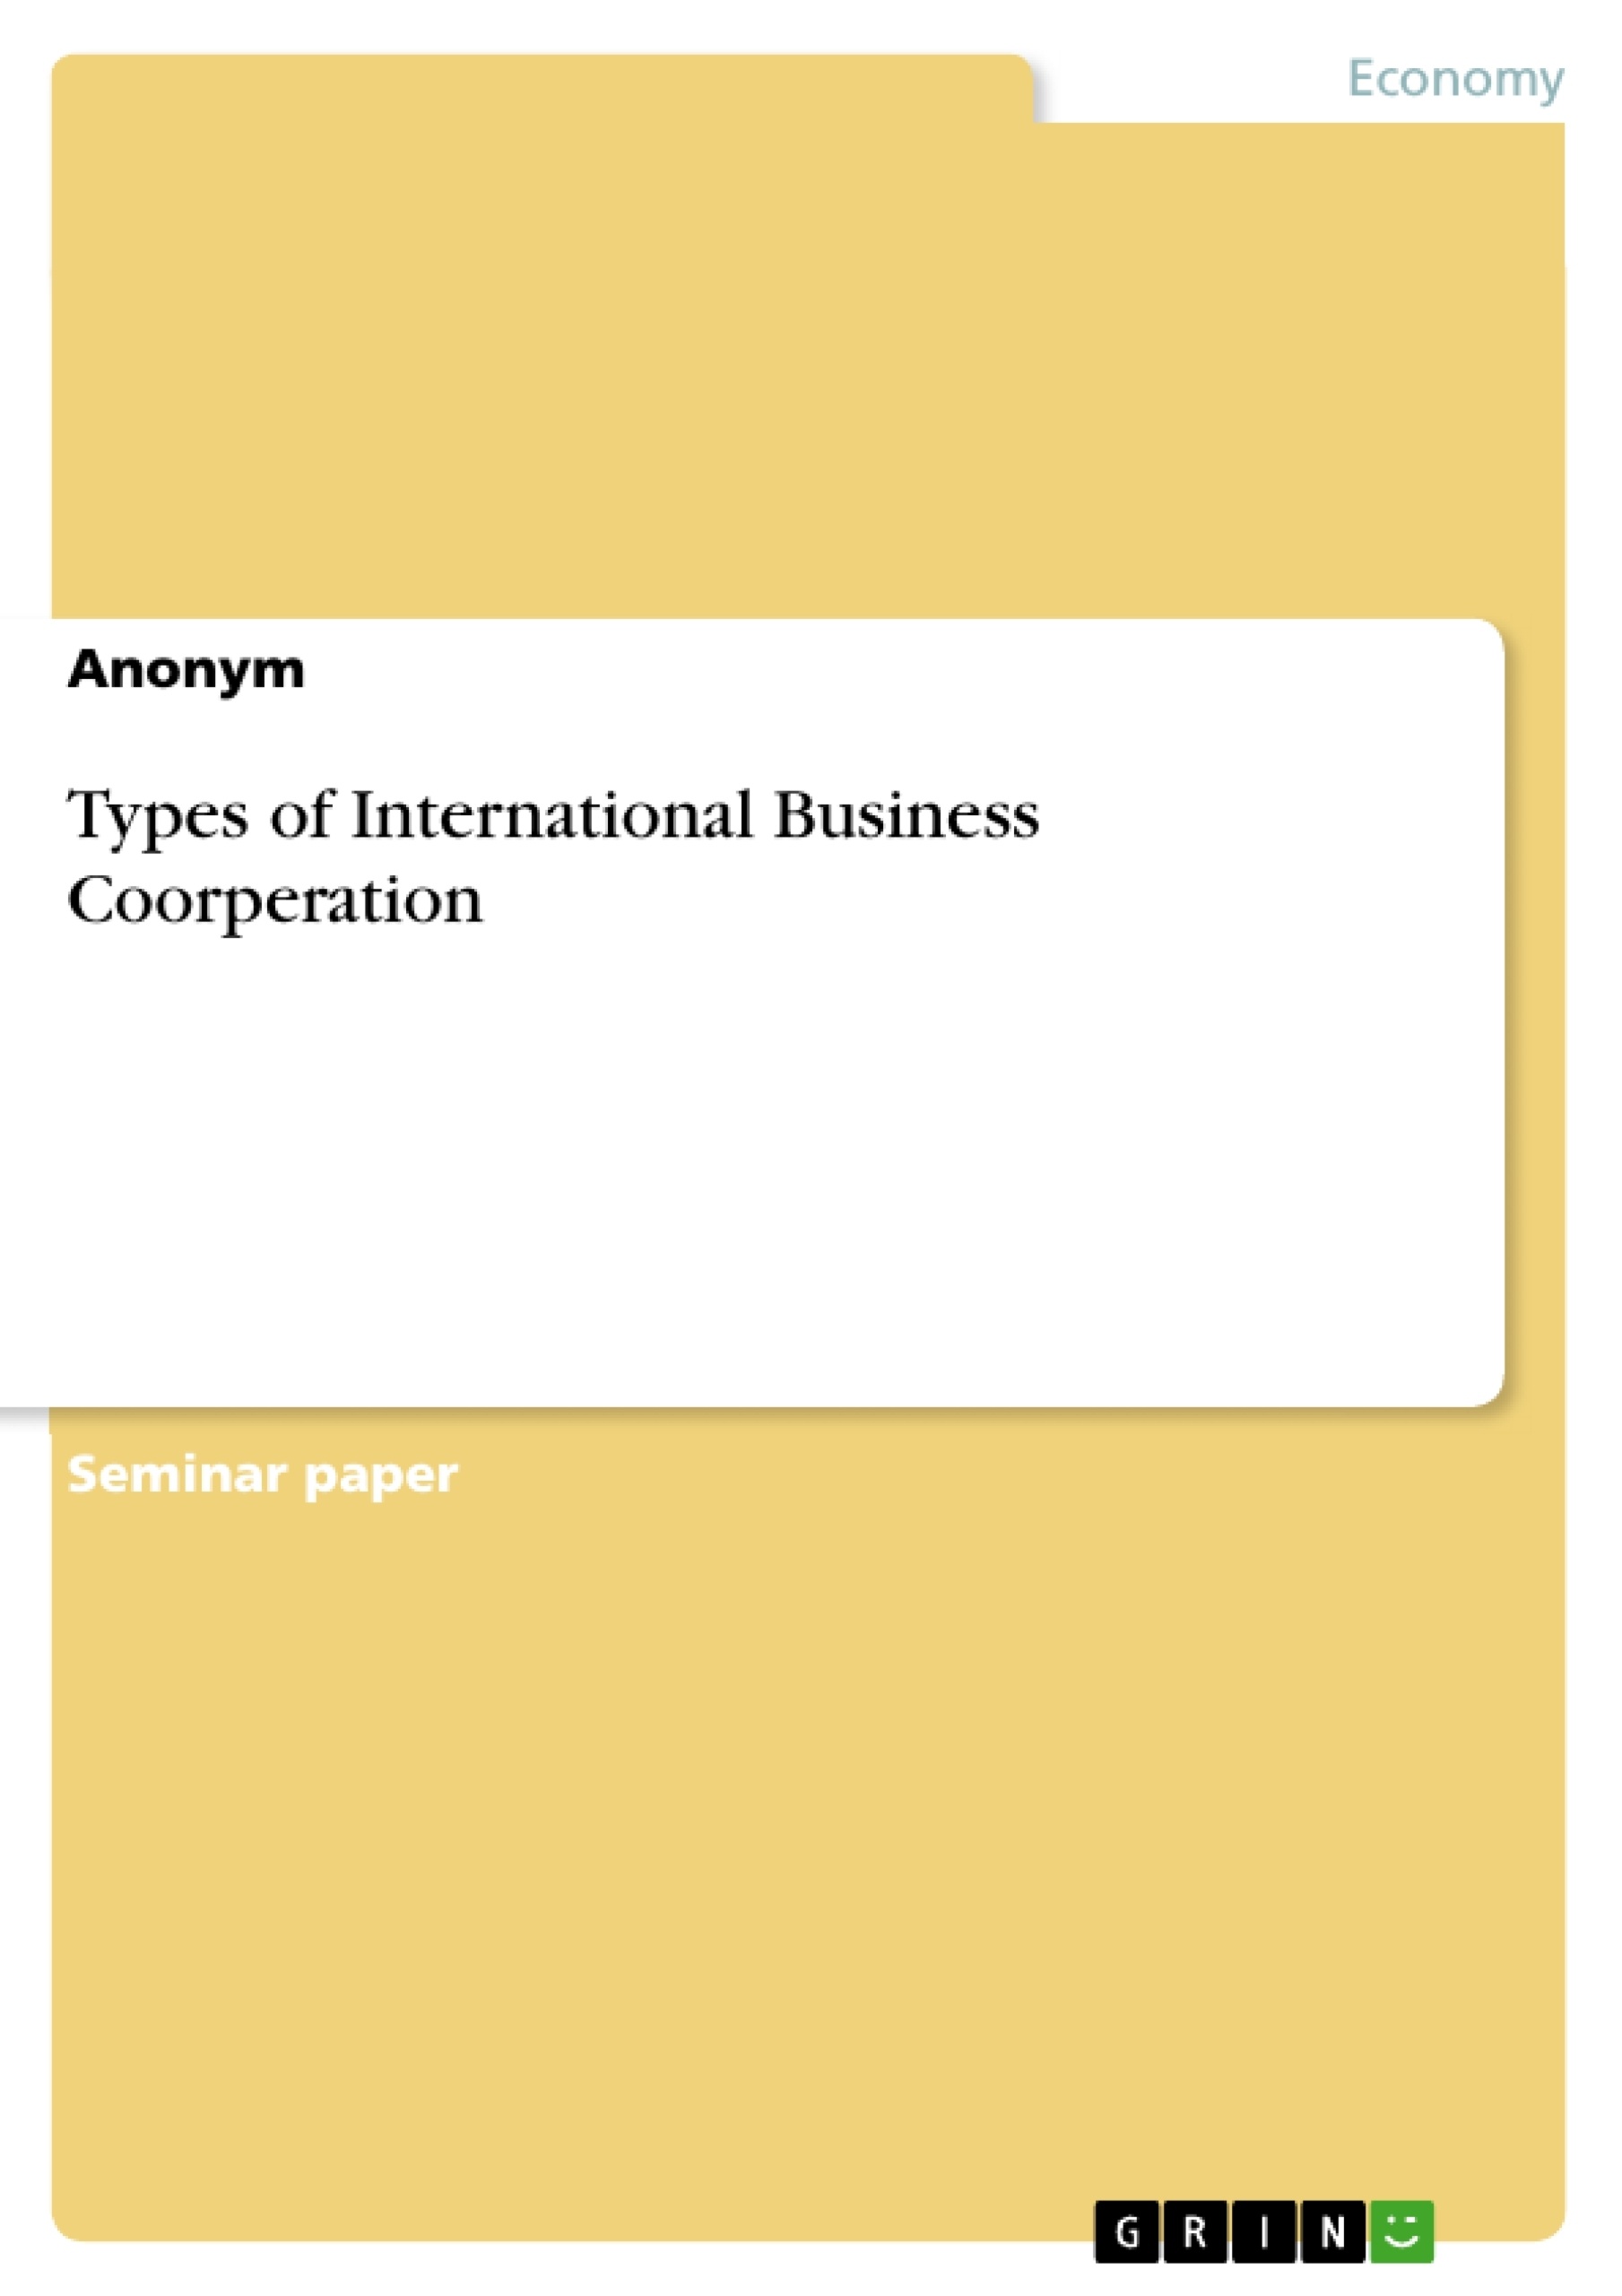 Title: Types of International Business Coorperation